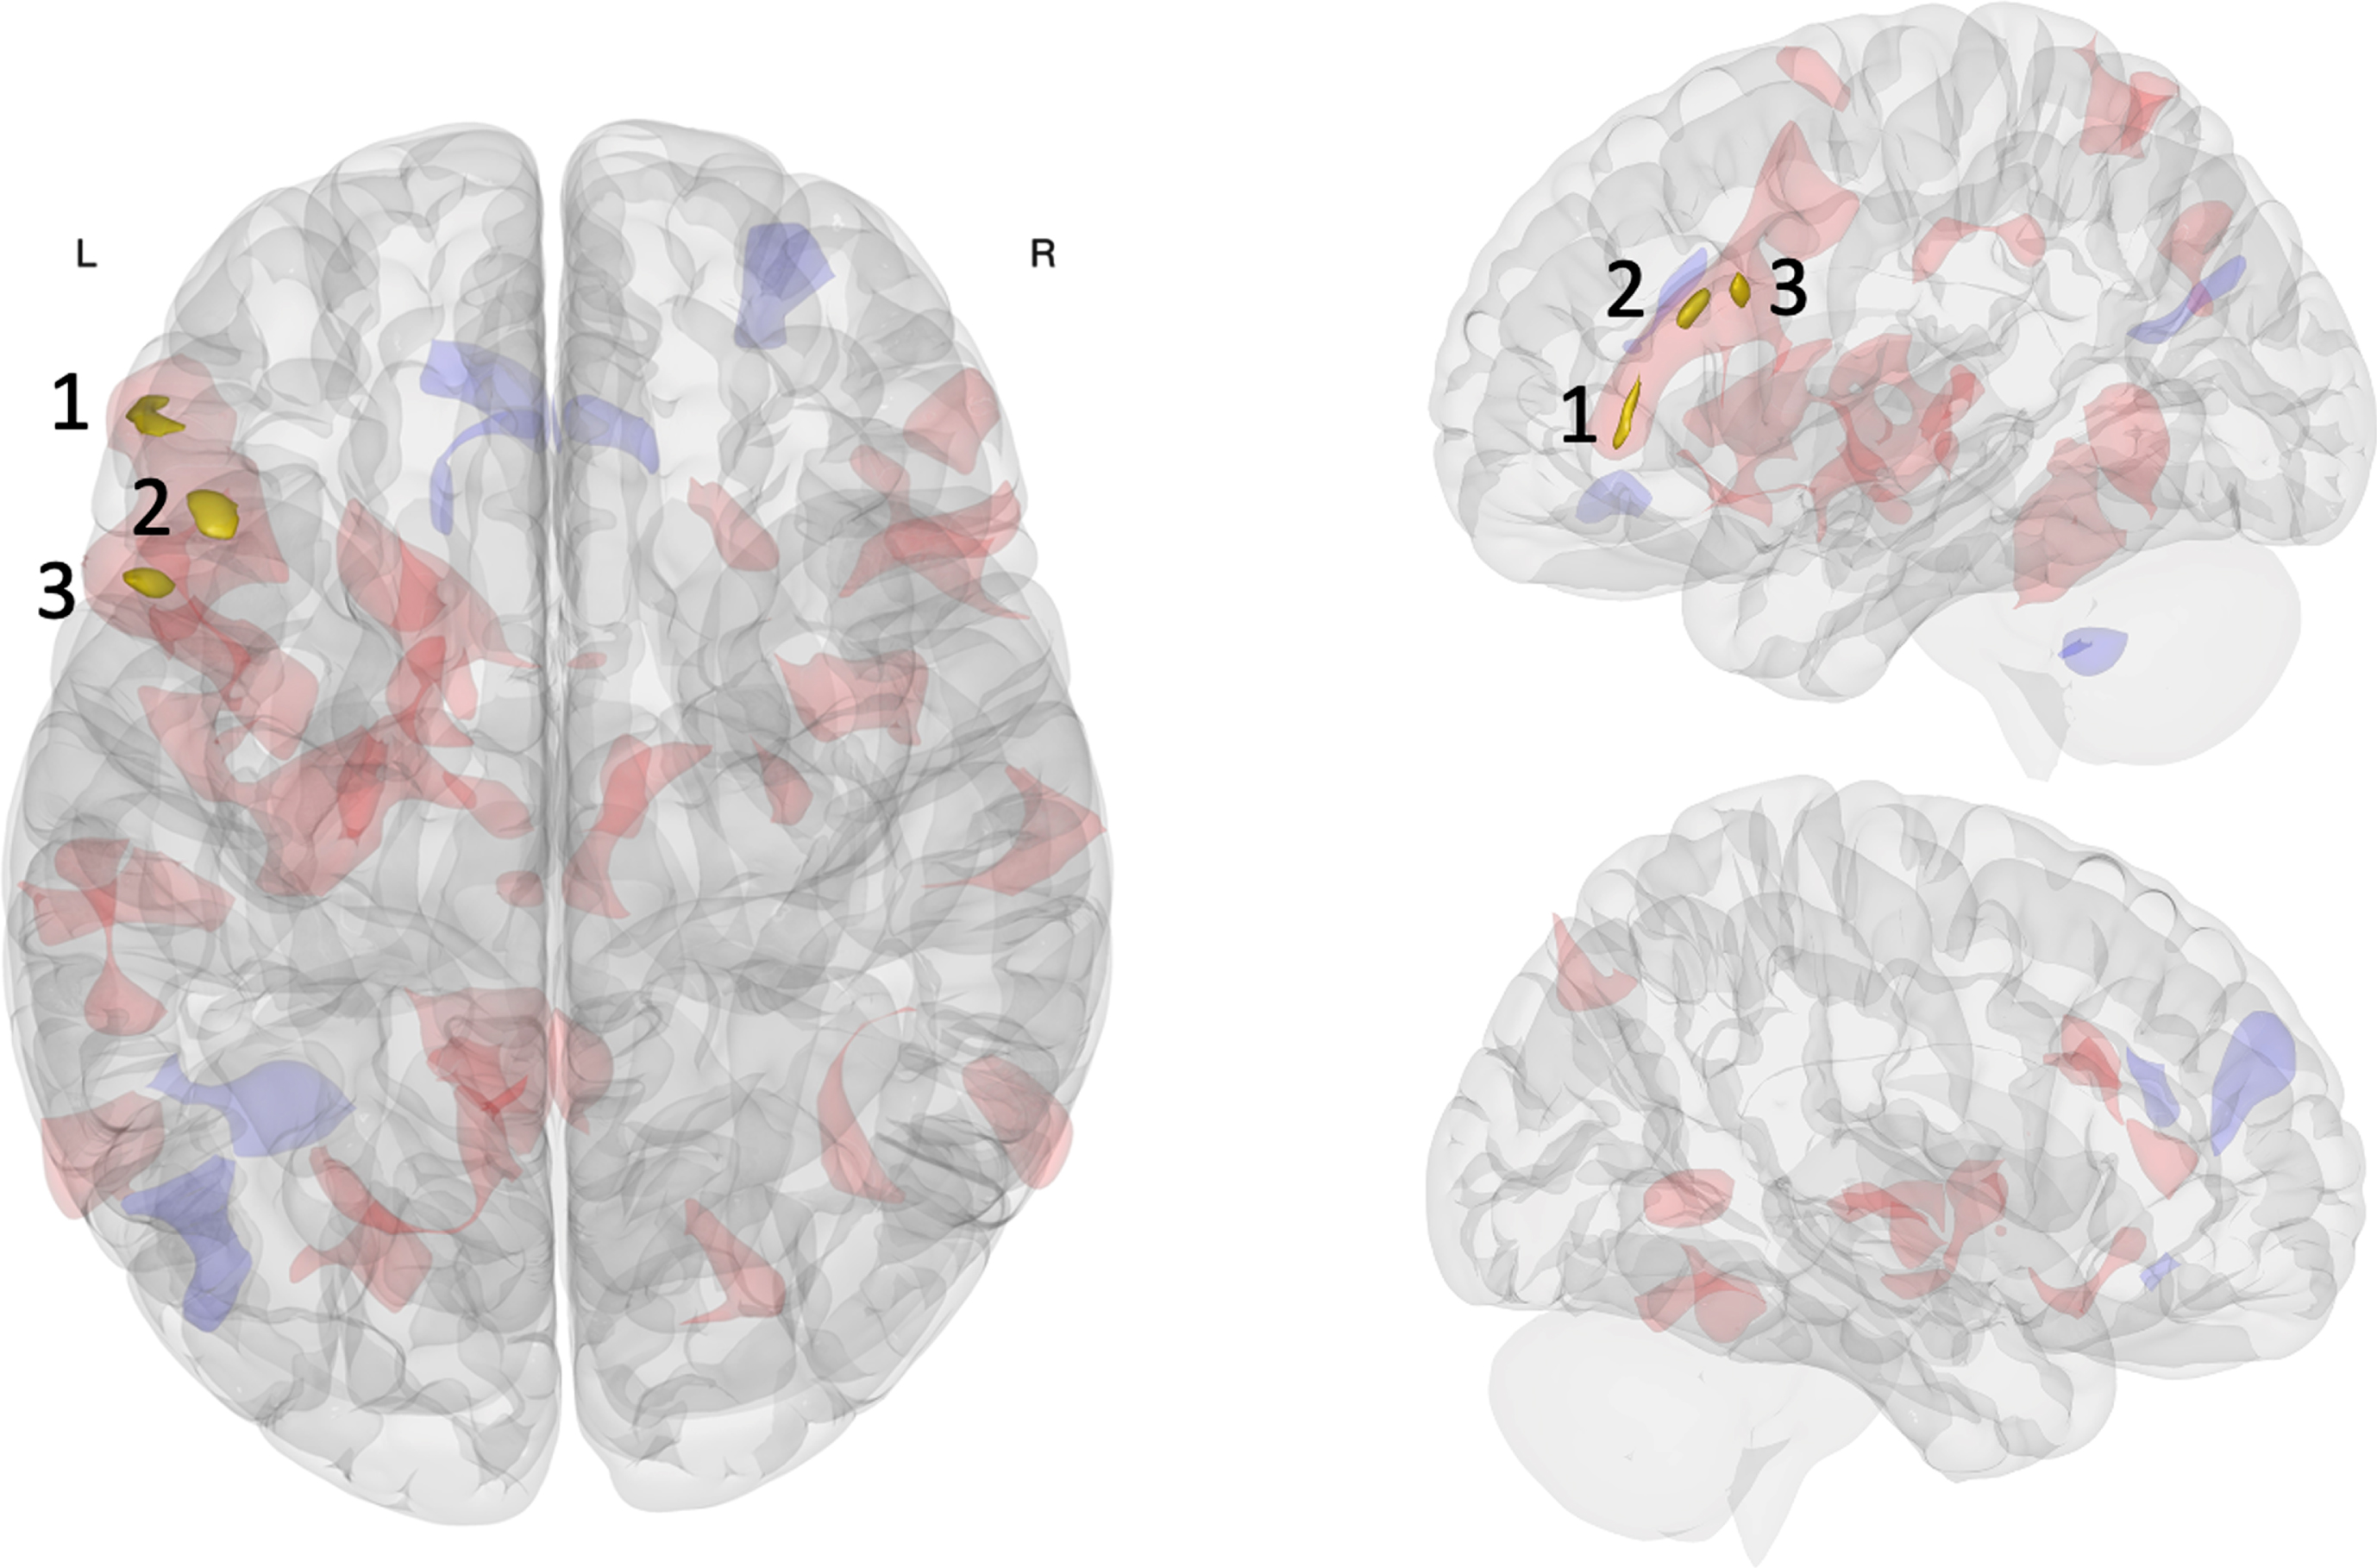 Multivariate analysis of resting-state functional connectivity results. Three clusters in the left FPN were associated with pre-to-post connectivity changes between the acute exercise and seated reading control conditions: inferior frontal gyrus pars triangularis (cluster 1), middle frontal gyrus (cluster 2), inferior frontal gyrus pars opercularis (cluster 3). Opaque gold clusters represent significant differences in rsFC change (voxel p<0.001; FDR-corrected cluster threshold p<0.05; k≥50). Shaded red (positive) and blue (negative) clusters show the broader pattern of rsFC change (post >  pre; exercise >  control) with an uncorrected significance threshold (voxel/cluster p <  0.05).